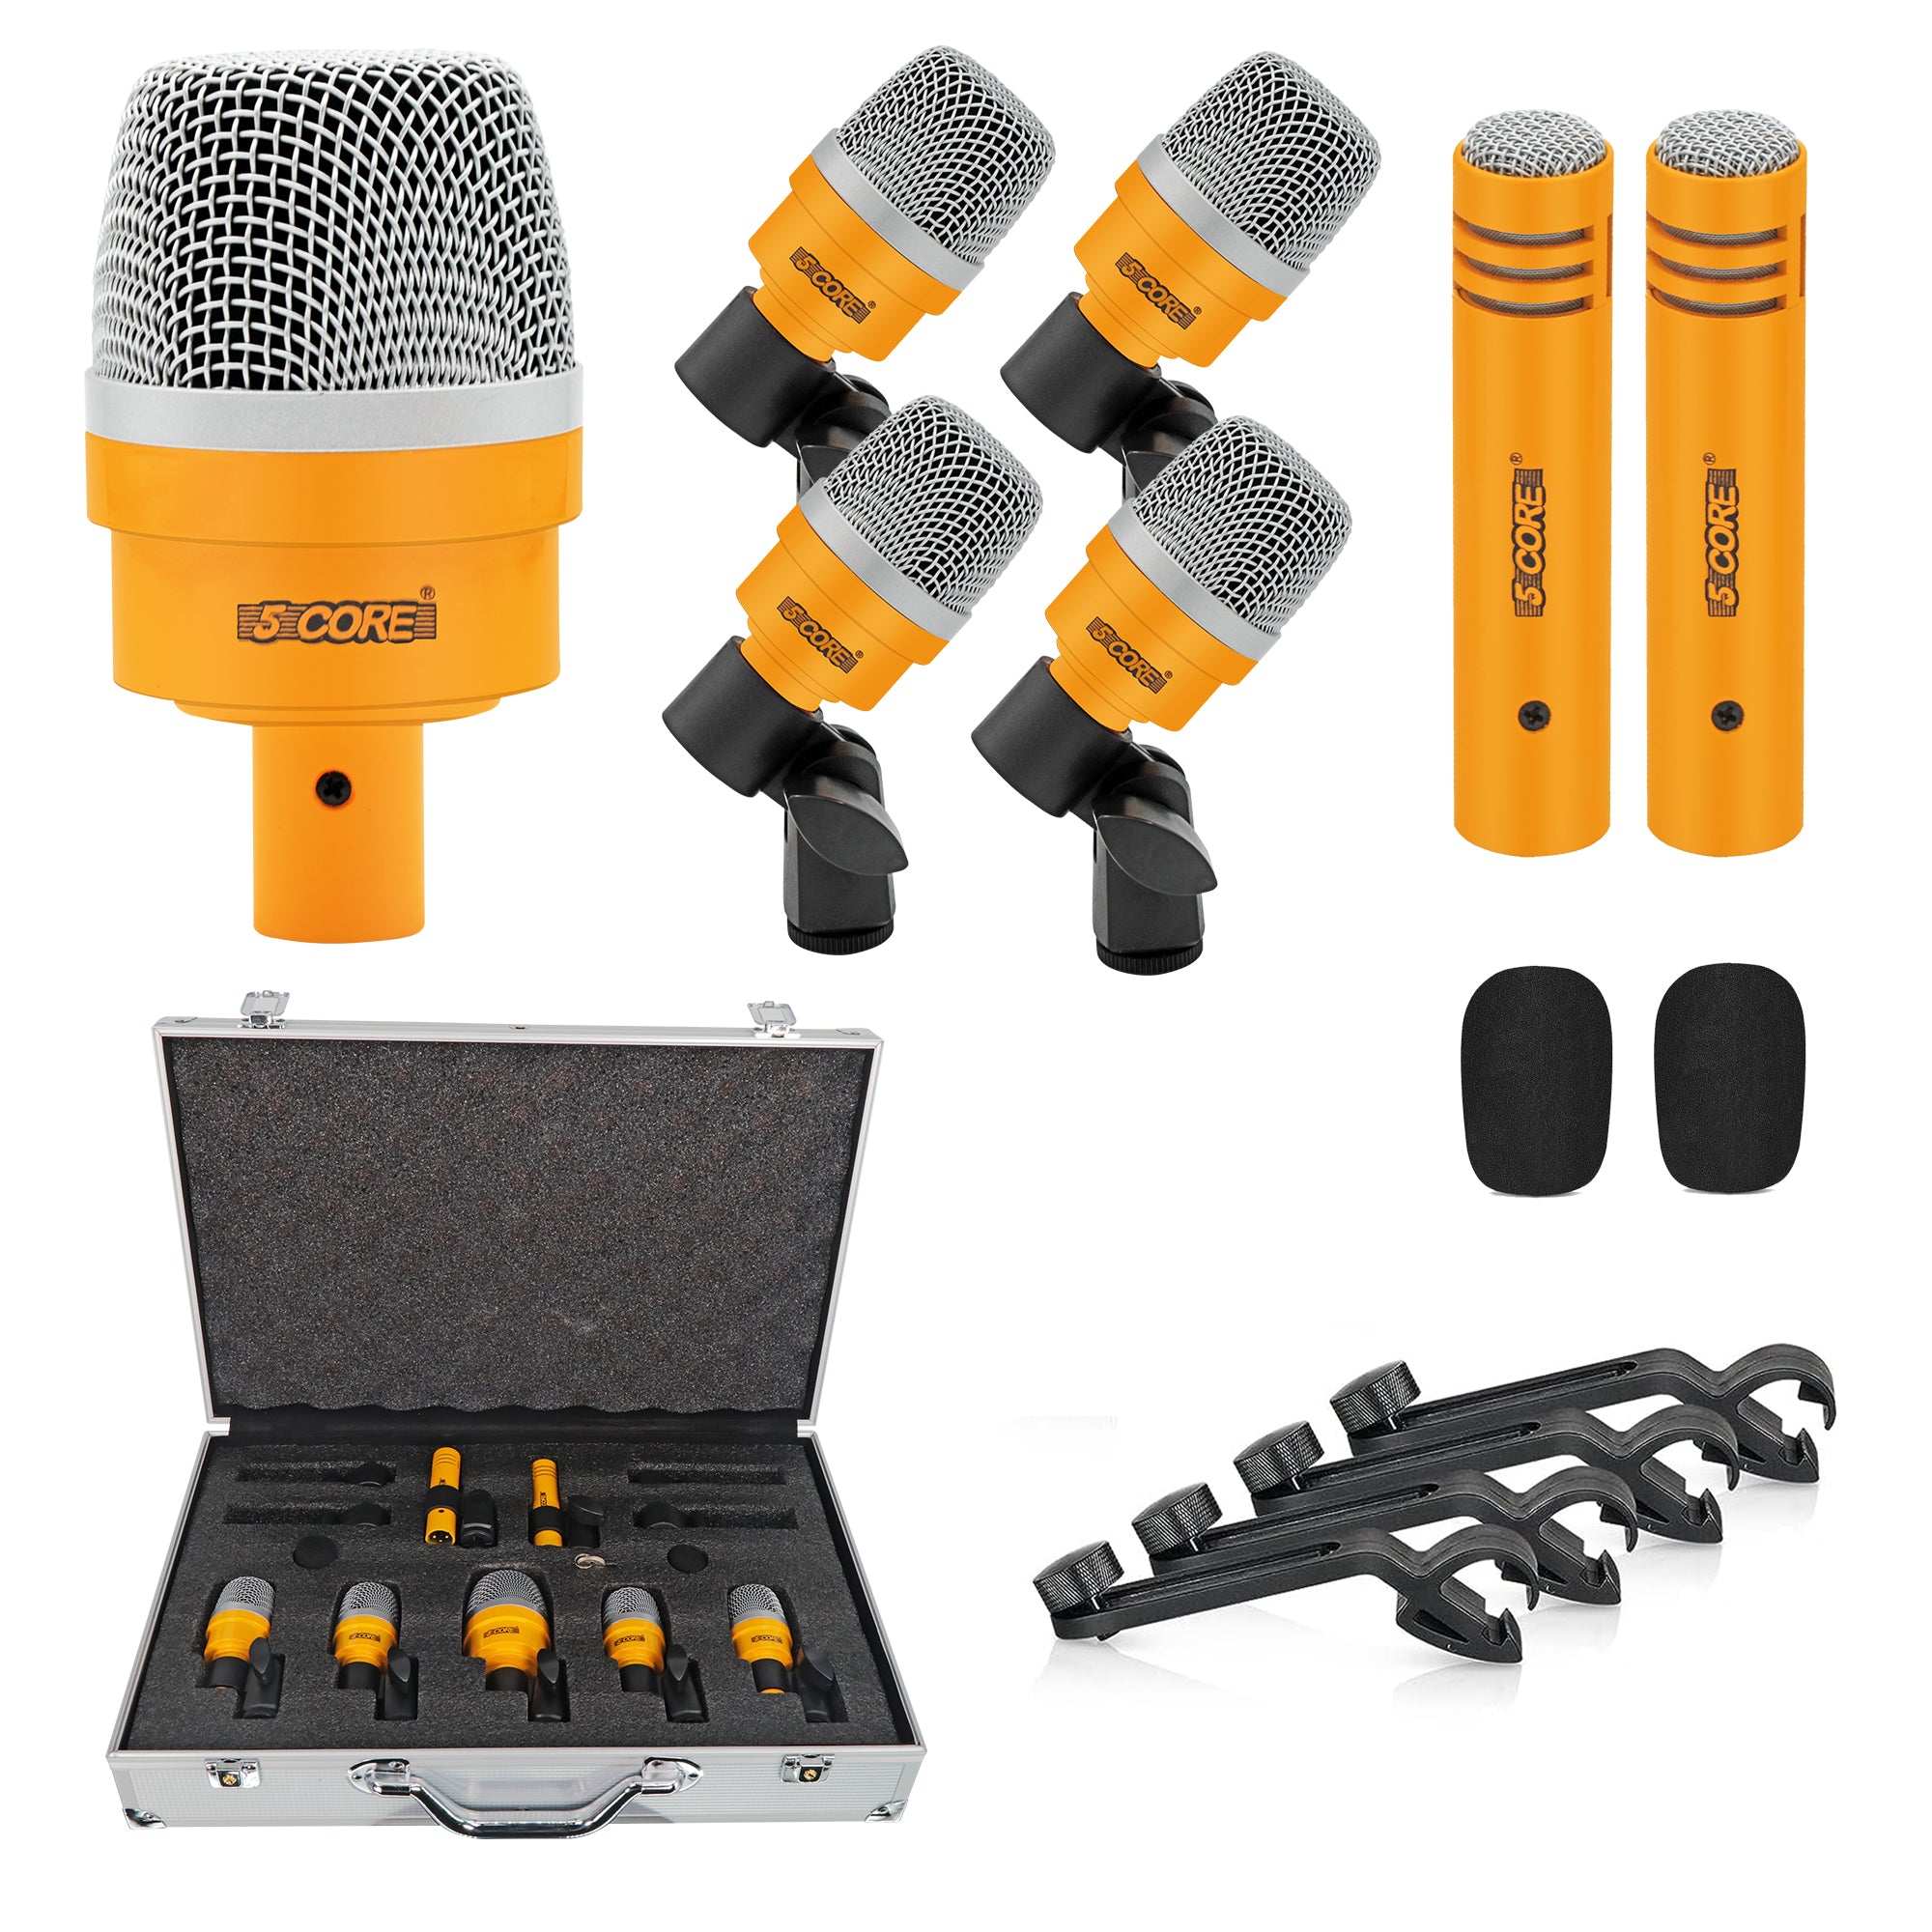 Vibrant yellow drum microphone set designed for drummers seeking standout style.